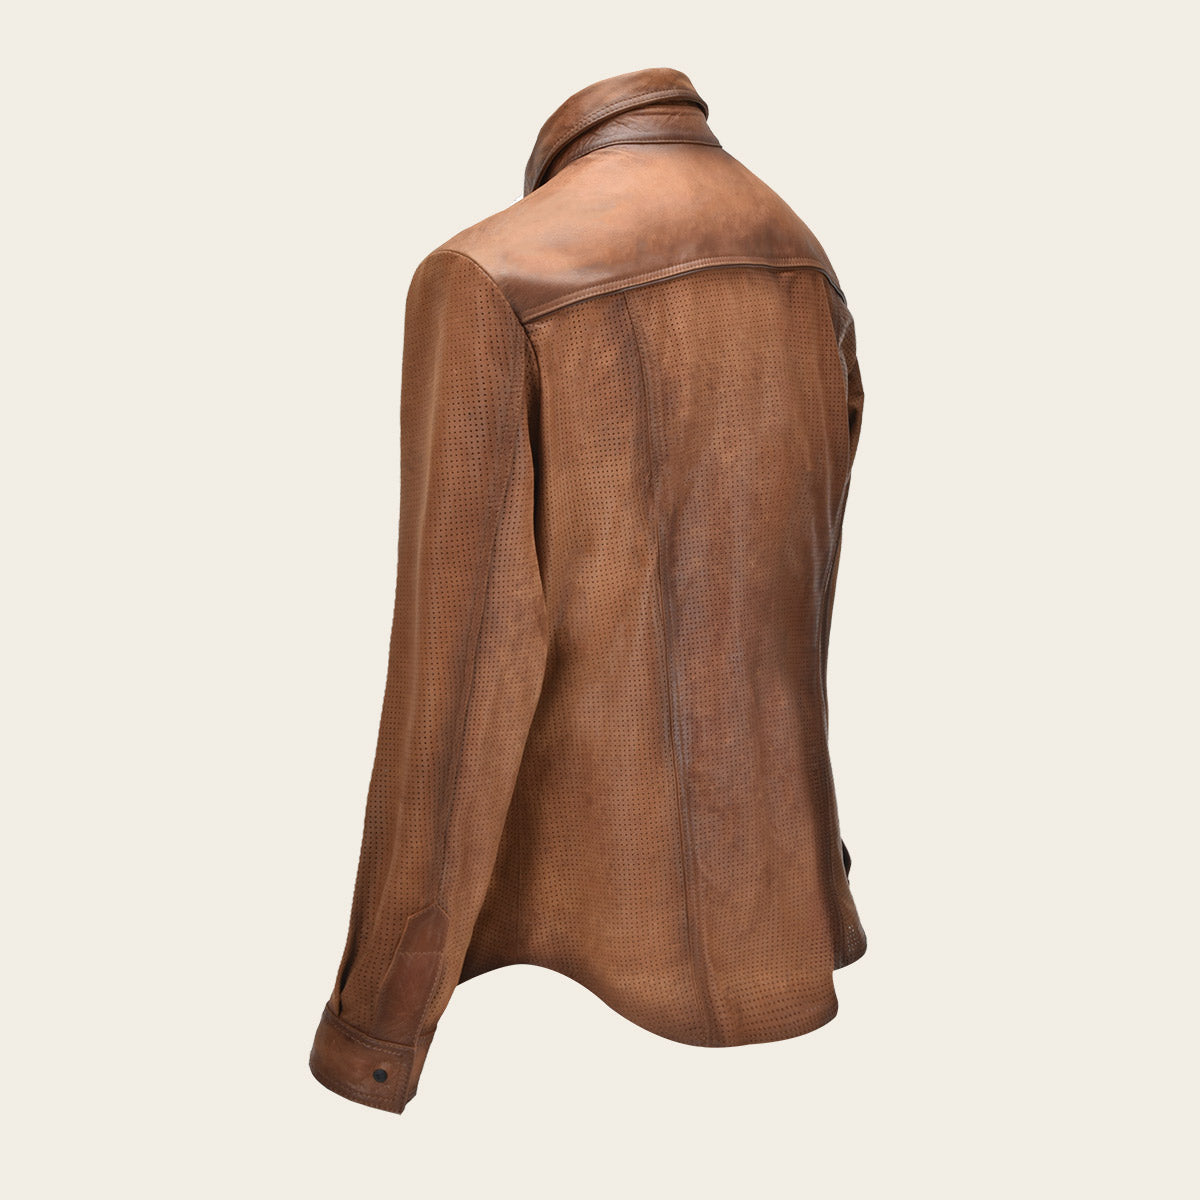 Camisole honey brown leather jacket